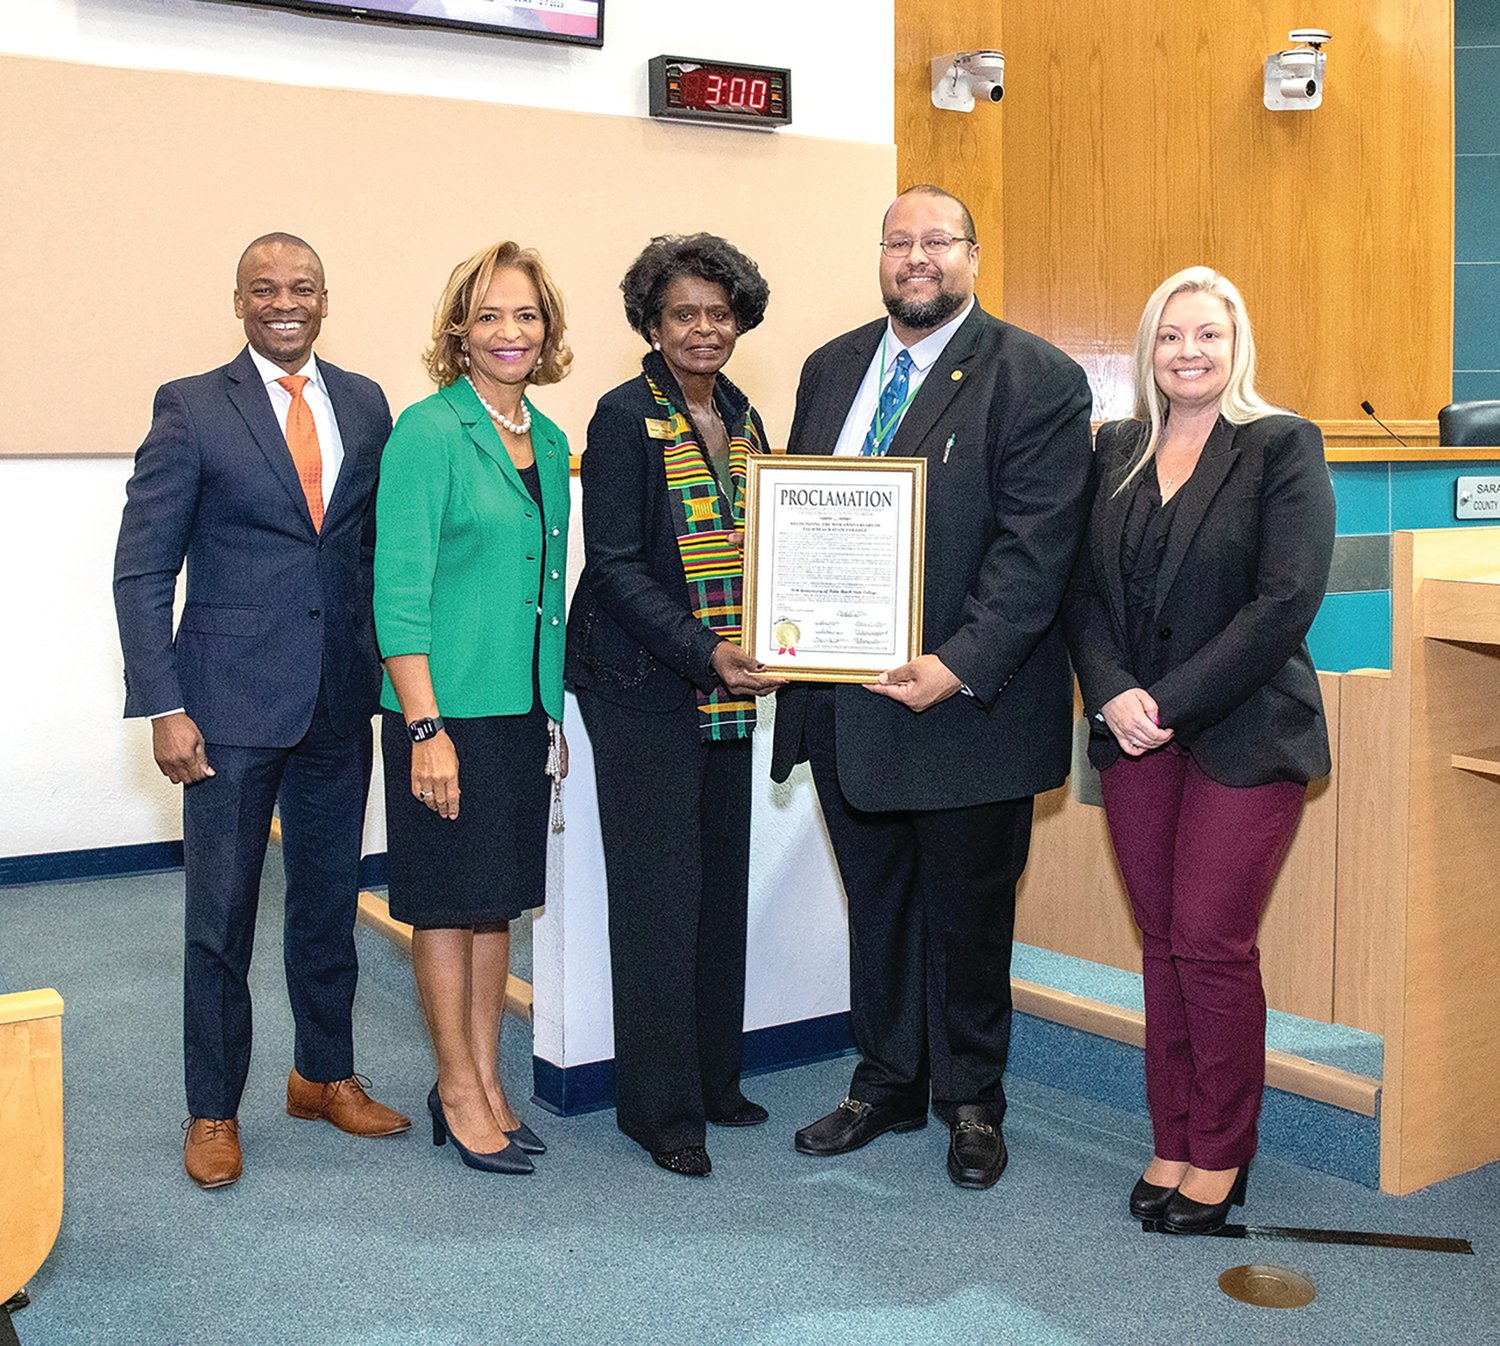 From left are: Commissioner Mack Bernard, PBSC President Ava L. Parker, Trustee Carolyn L. Williams and Commissioners Michael Barnett and Sara Baxter.